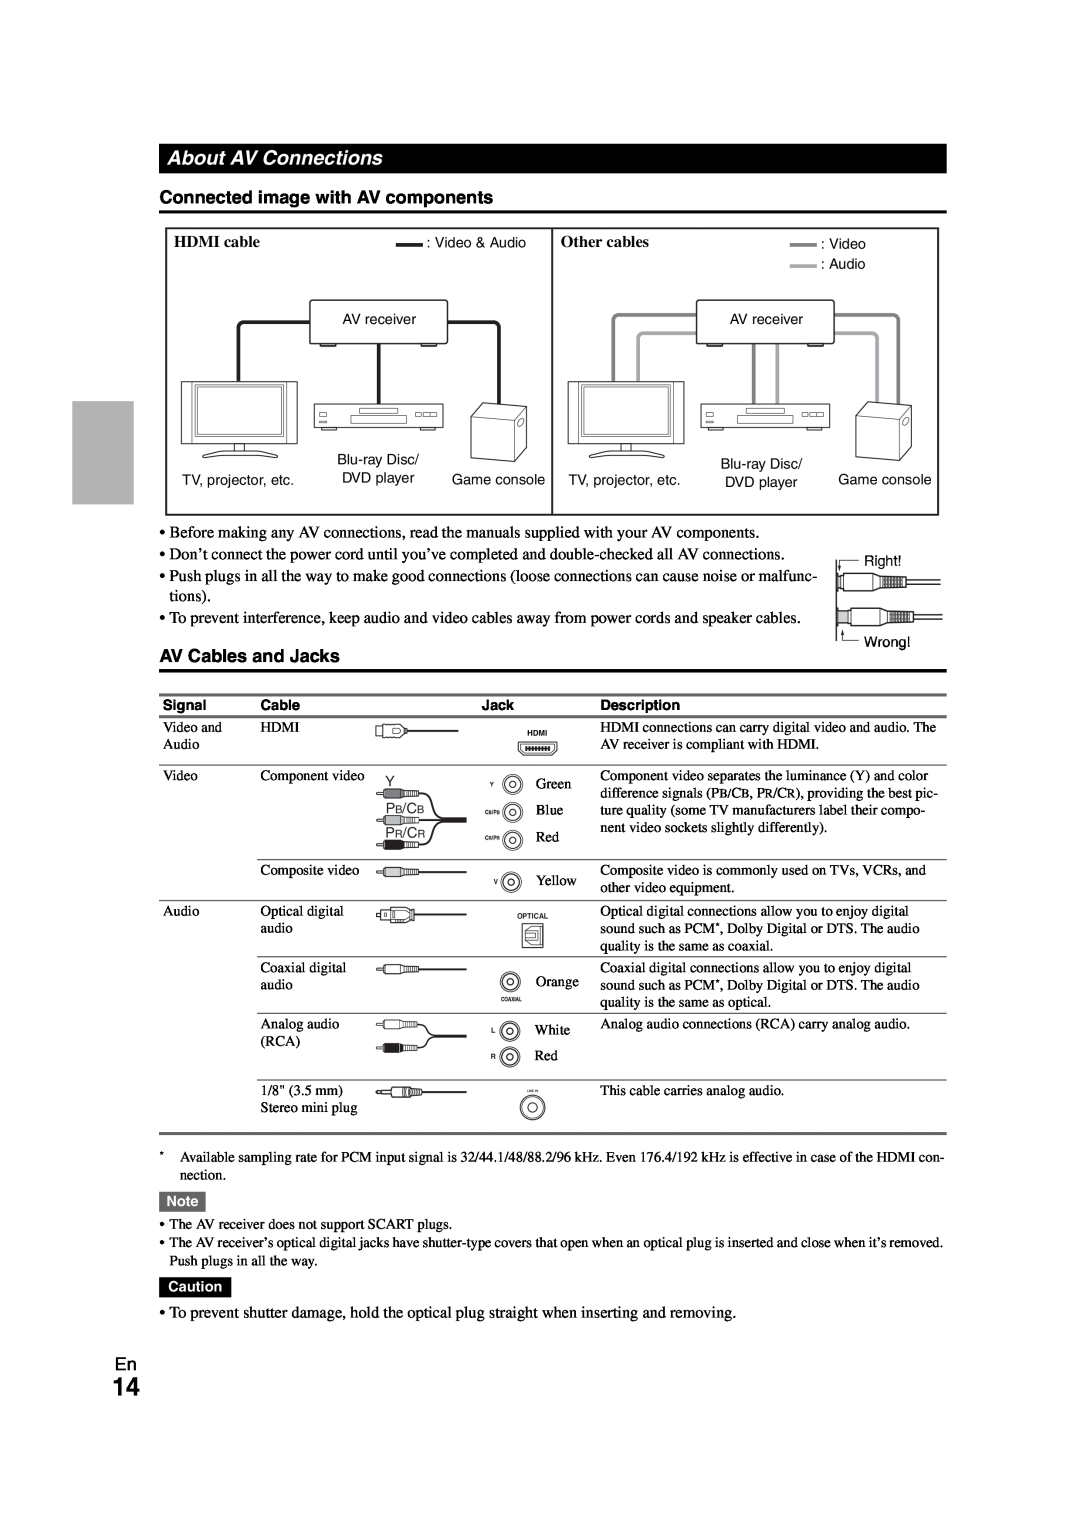 Onkyo TX-SR508 instruction manual About AV Connections, Connected image with AV components, AV Cables and Jacks 